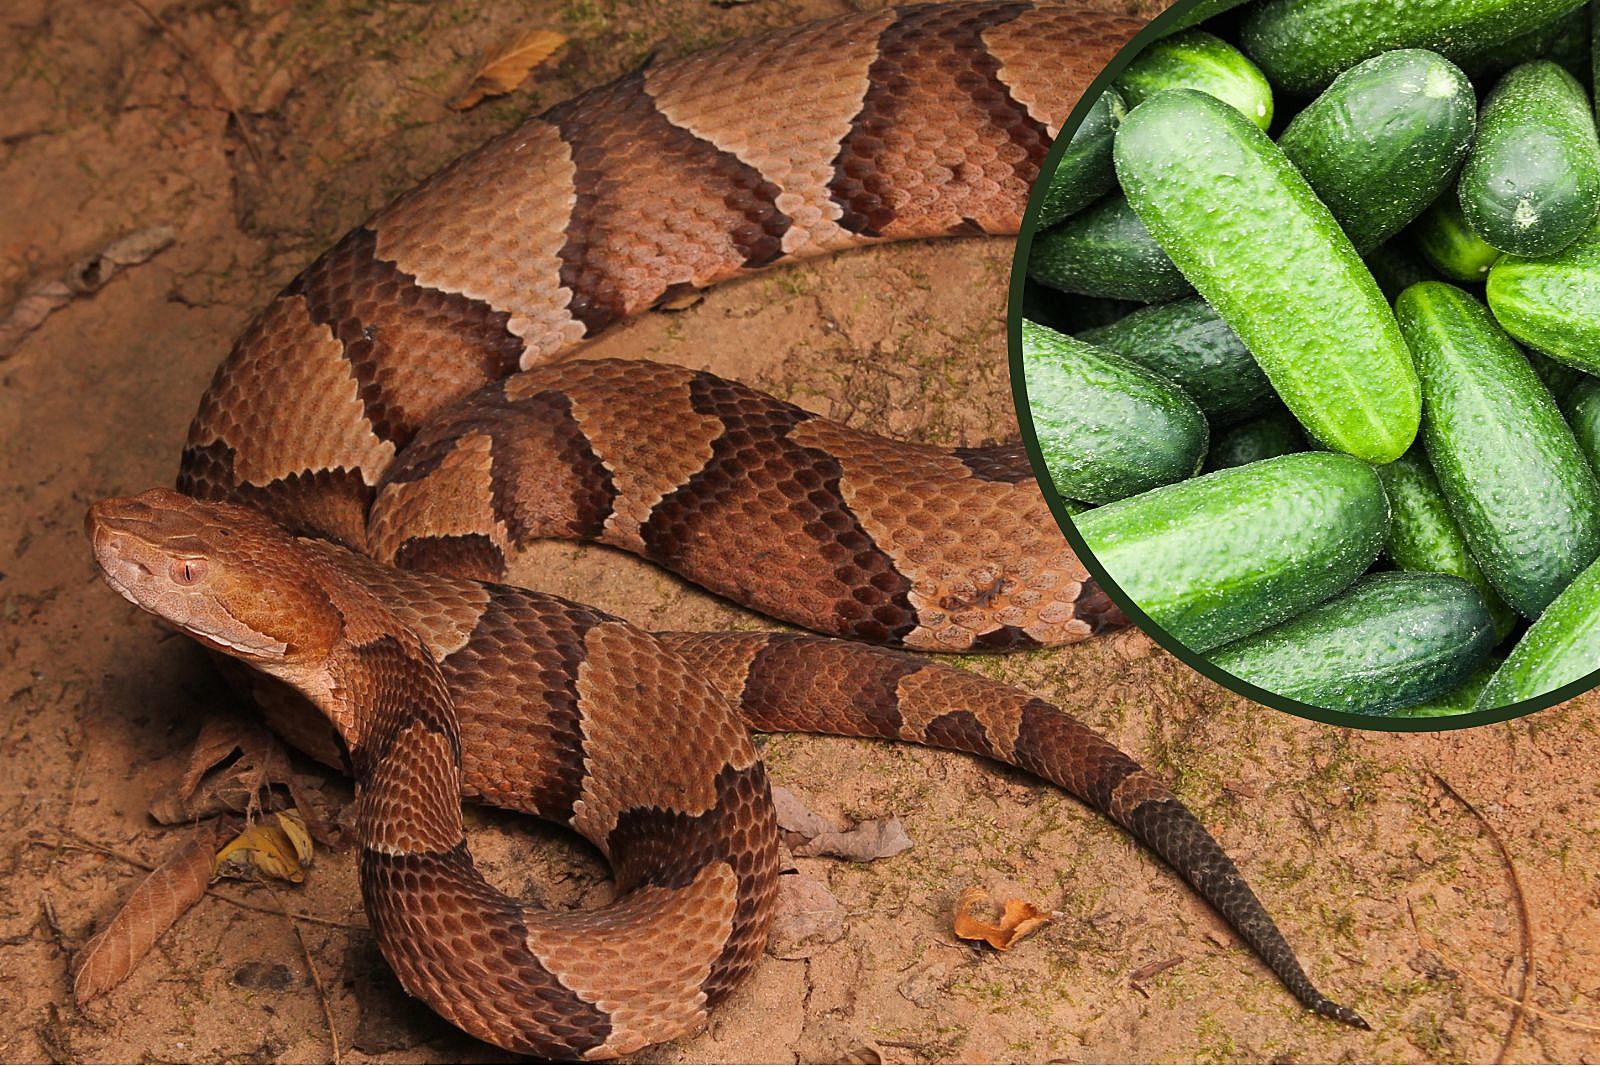 Cucumber Smell Perception In Snakes